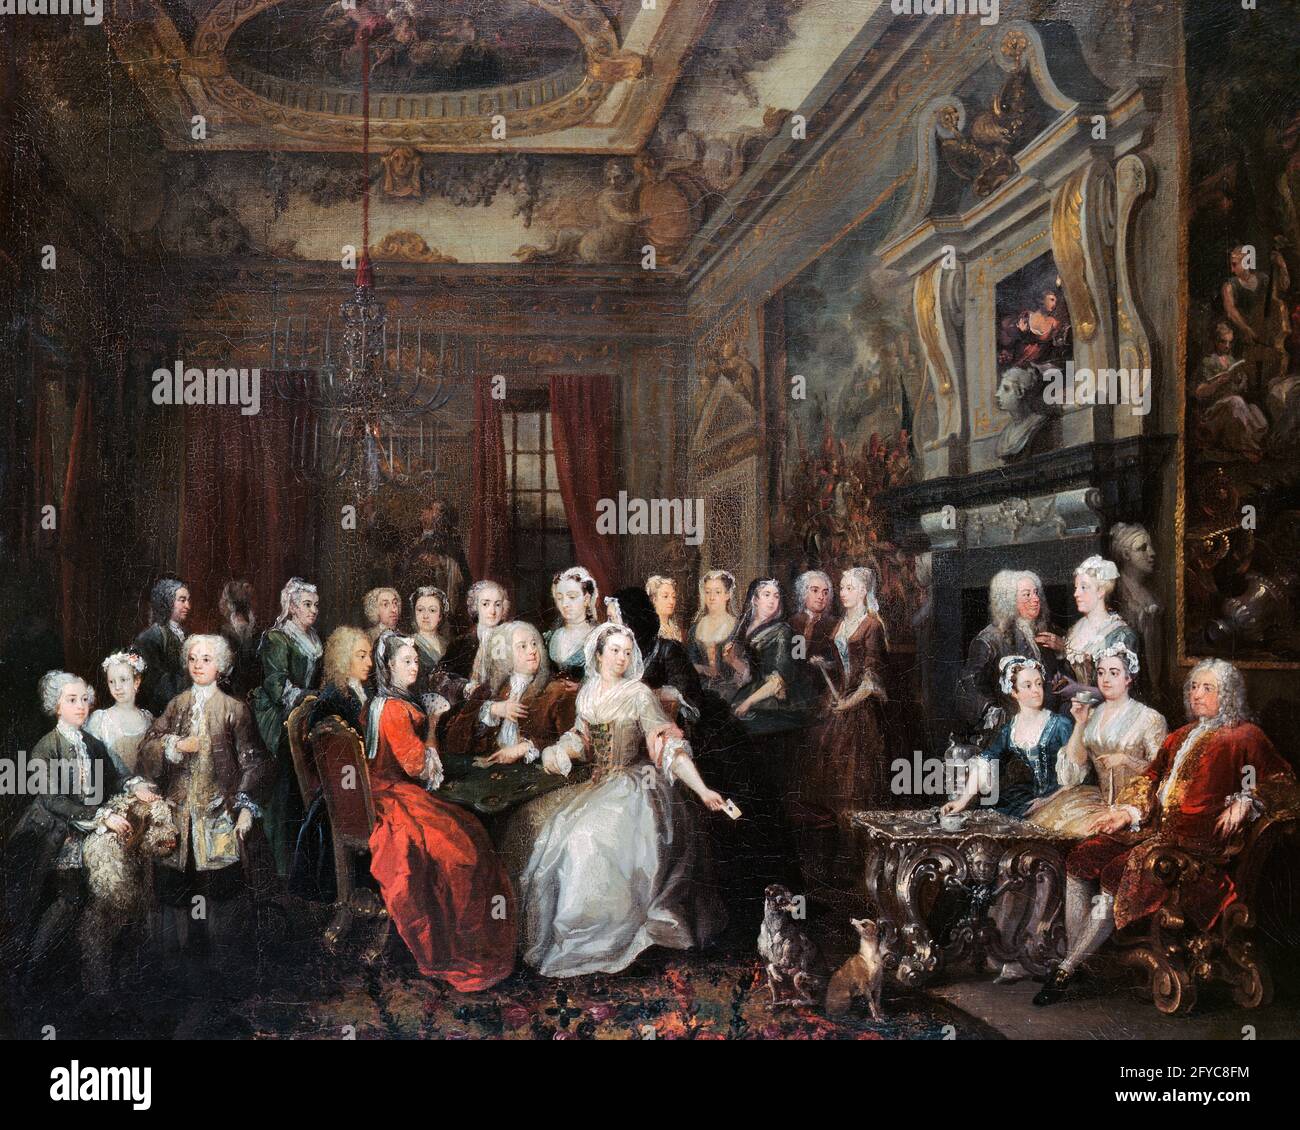 1730s 1731 ASSEMBLY AT WANSTEAD HOUSE PAINTING BY WILLIAM HOGARTH 25TH WEDDING CELEBRATION OF VISCOUNT CASTLEMAIN AND WIFE - ka9286 SPL001 HARS COPY SPACE FRIENDSHIP FULL-LENGTH LADIES PERSONS MALES FATHERS PARTNER WIDE ANGLE MAMMALS CANINES DADS EXCITEMENT AT BY UPSCALE POOCH CONCEPTUAL AFFLUENT CARD GAME STYLISH 1730s CANINE MAMMAL MOMS TOGETHERNESS WELL-TO-DO WILLIAM HOGARTH WIVES CAUCASIAN ETHNICITY OLD FASHIONED Stock Photo